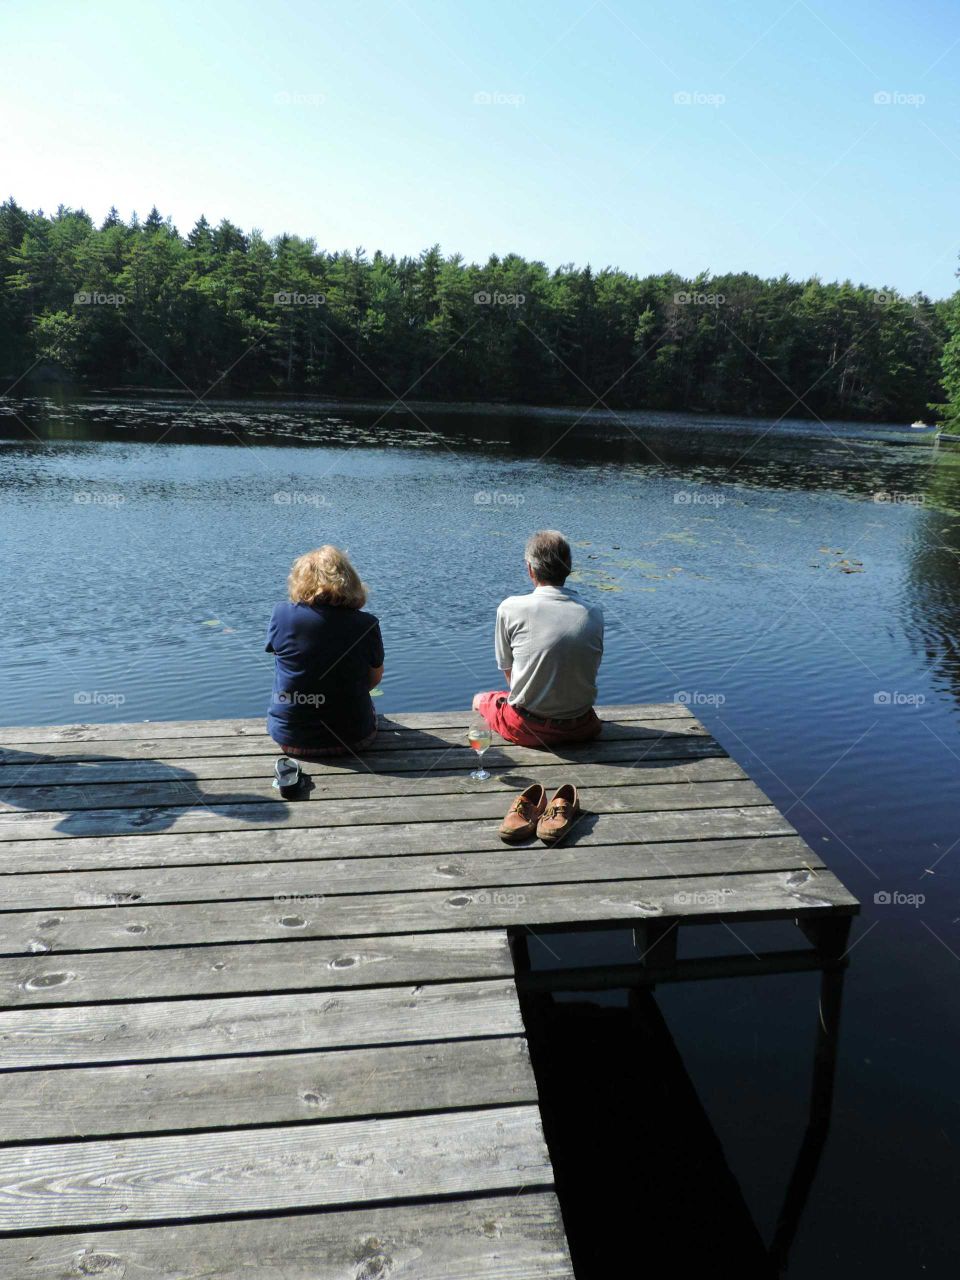 People on the dock